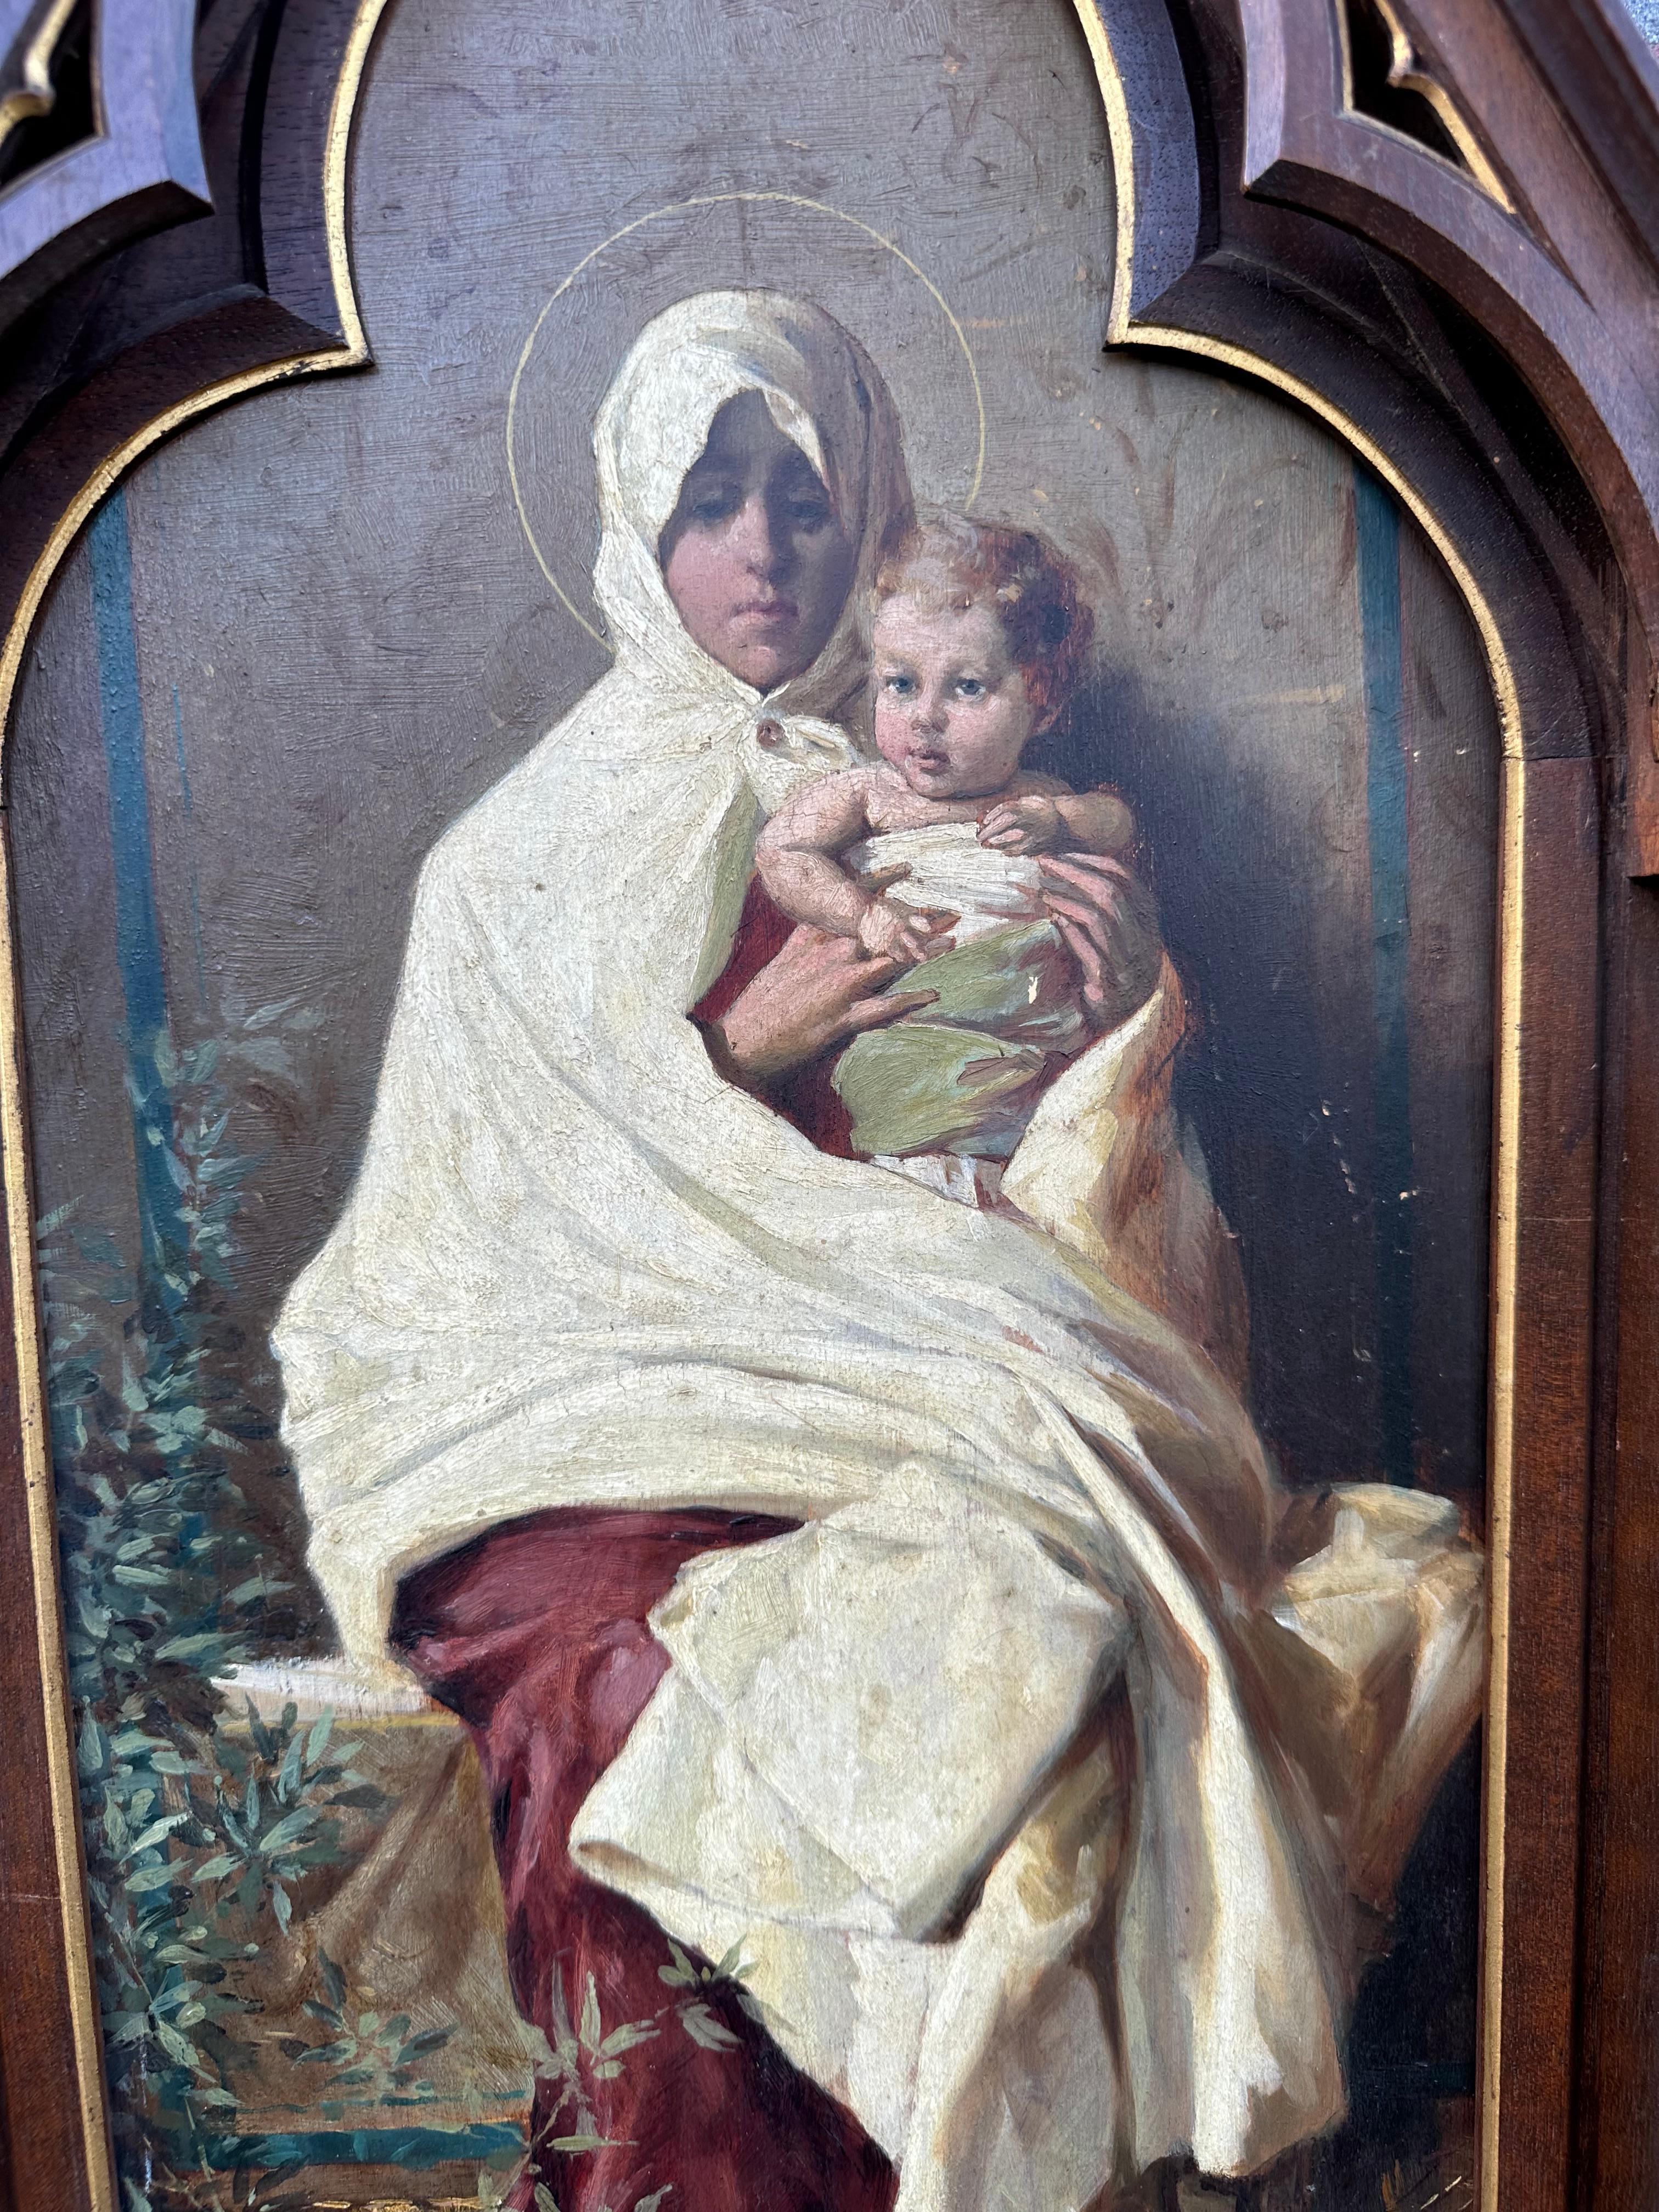 Symbolic and meaningful work of religious art with original label on the back.

Framed oil on wooden panel, Madonna and child, after Italian Nicolo Barabino (1833-1891). The original painting of which this is an antique Italian reproduction is